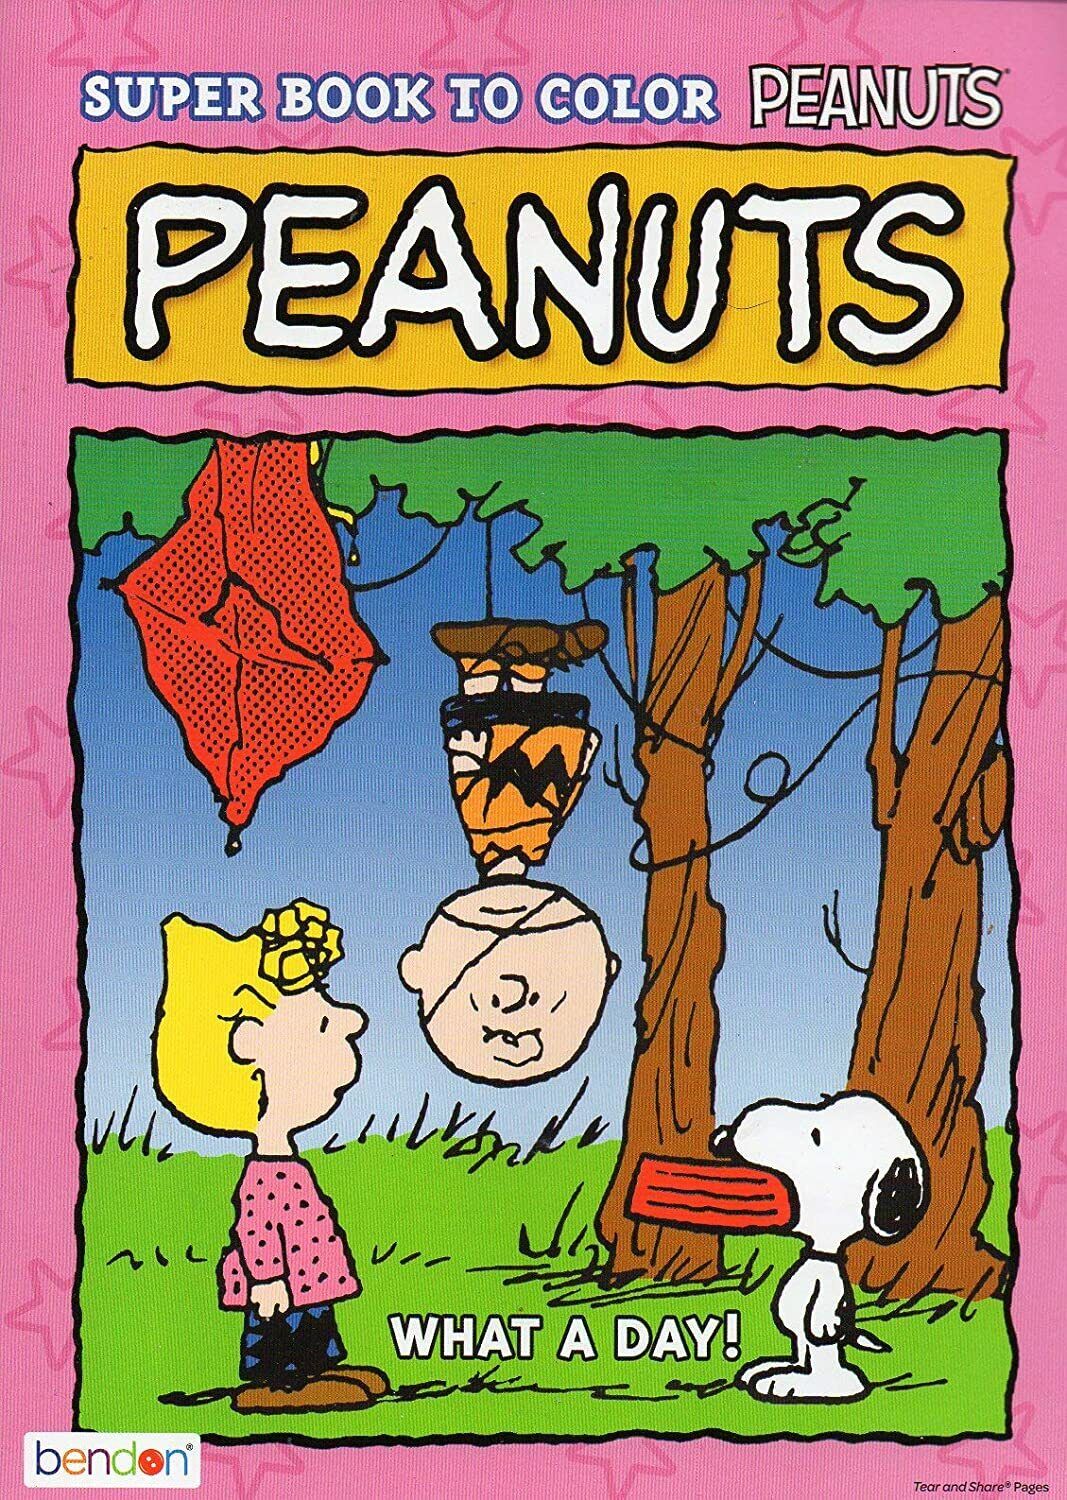 Super Book to Color Peanuts - What a Day!